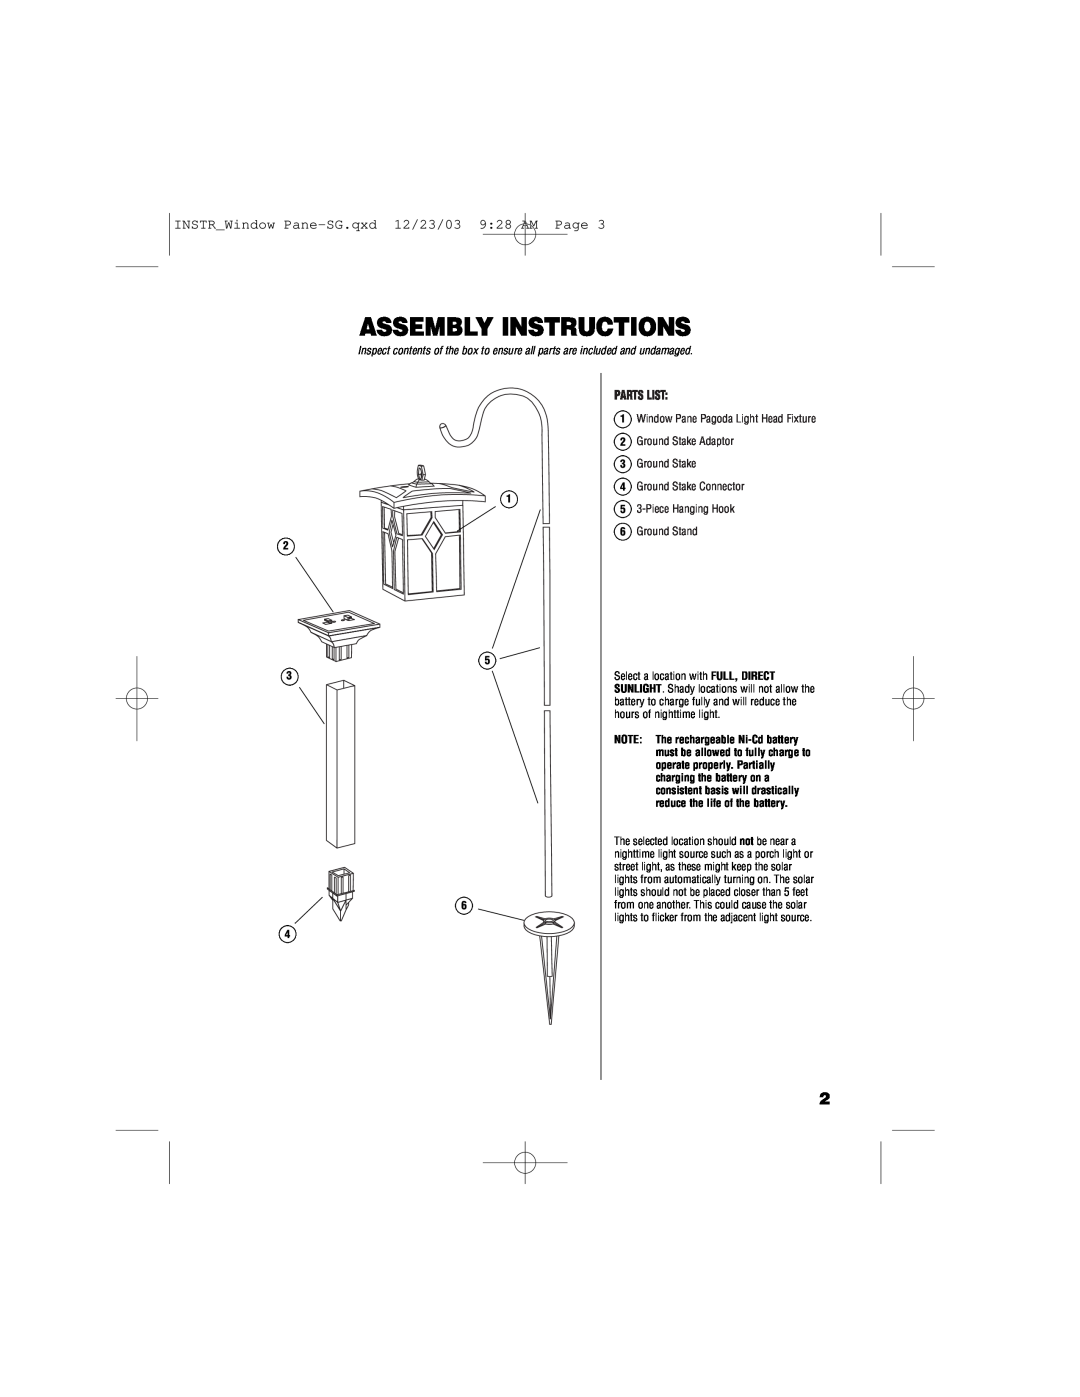 Brinkmann 822-2509-2 owner manual Assembly Instructions, Parts List, INSTRWindow Pane-SG.qxd 12/23/03 928 AM Page 